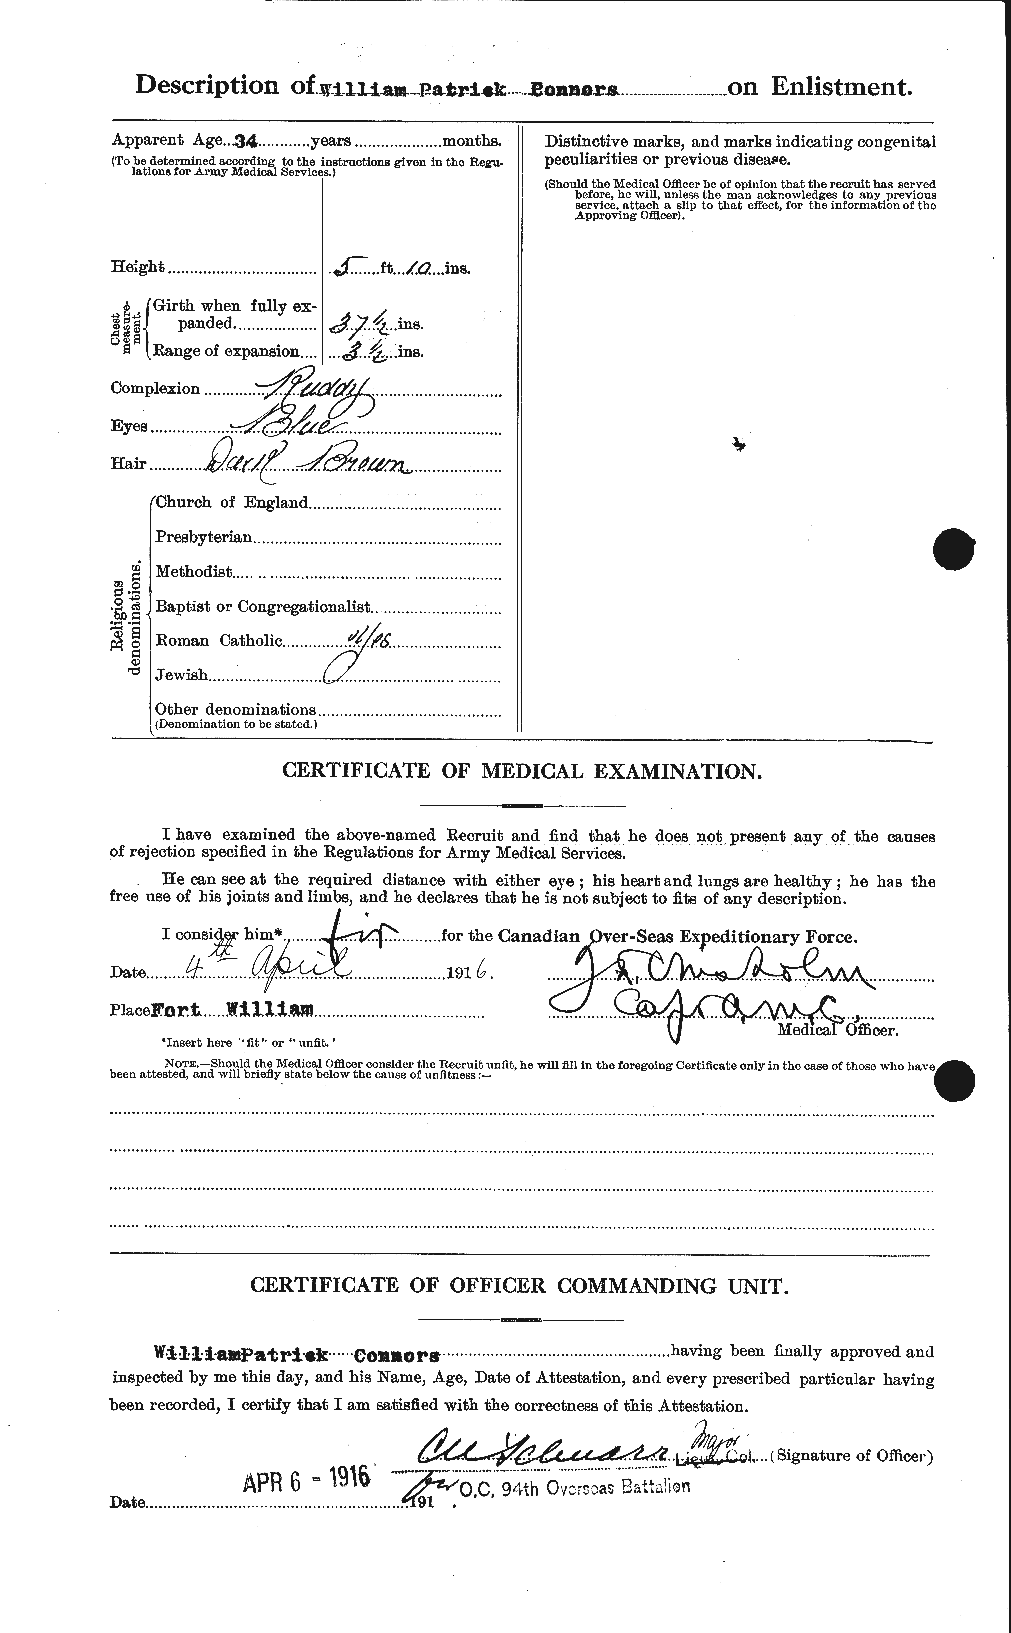 Personnel Records of the First World War - CEF 071443b